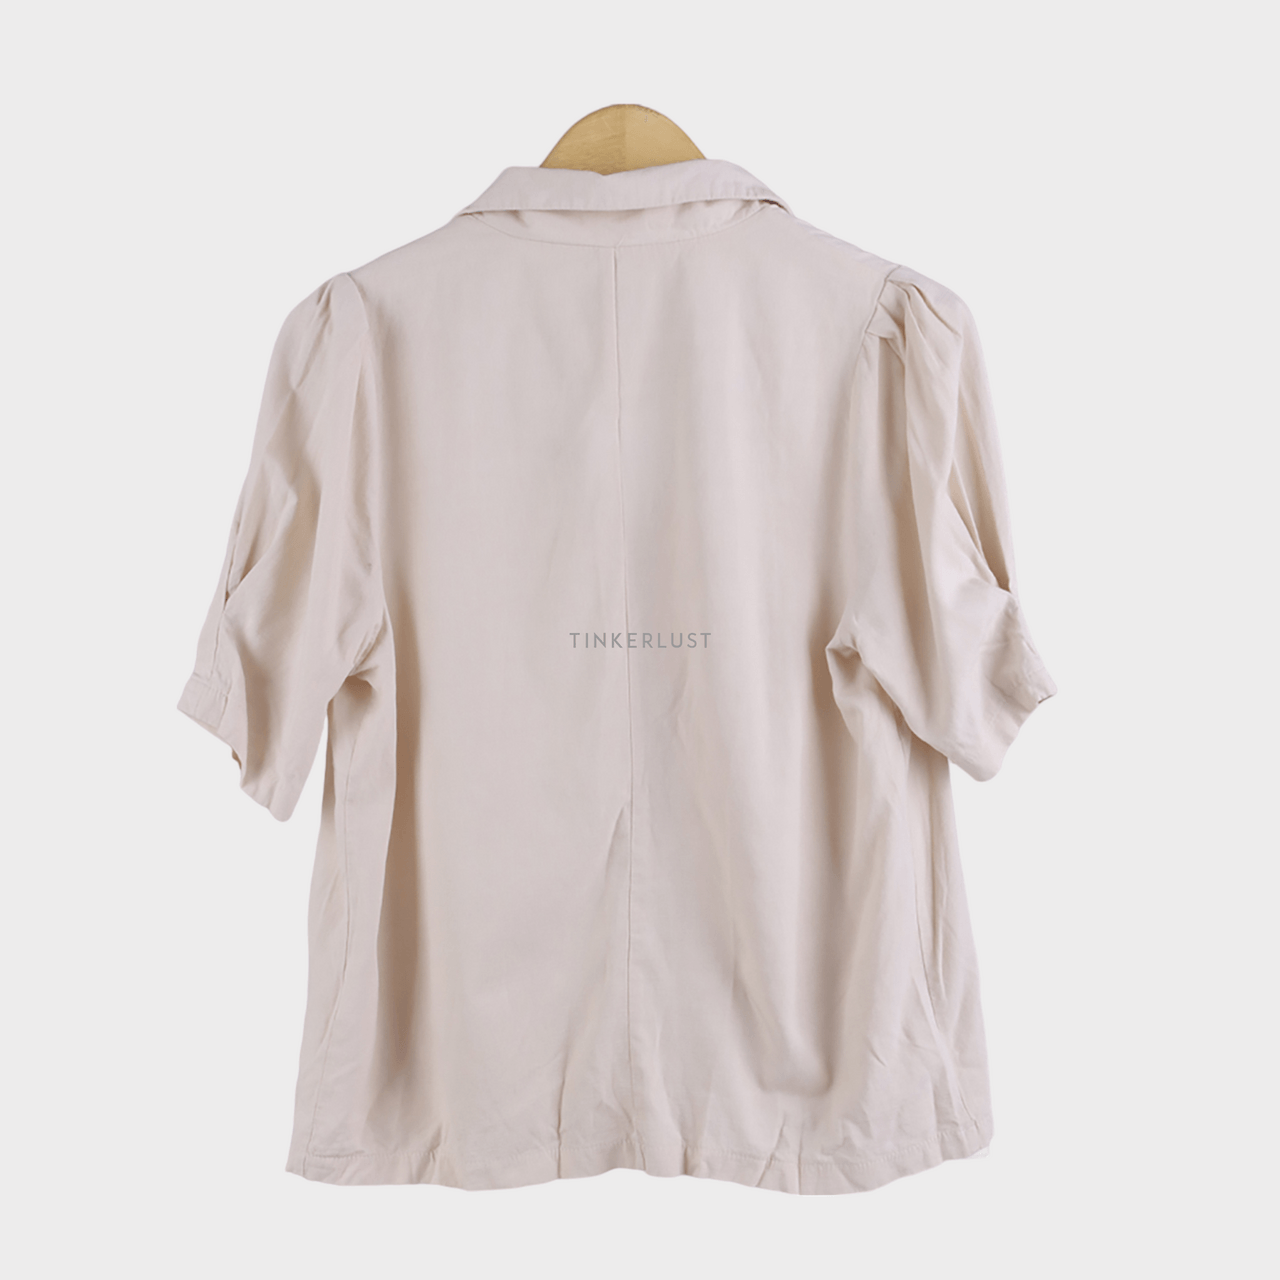 This is April Cream Shirt